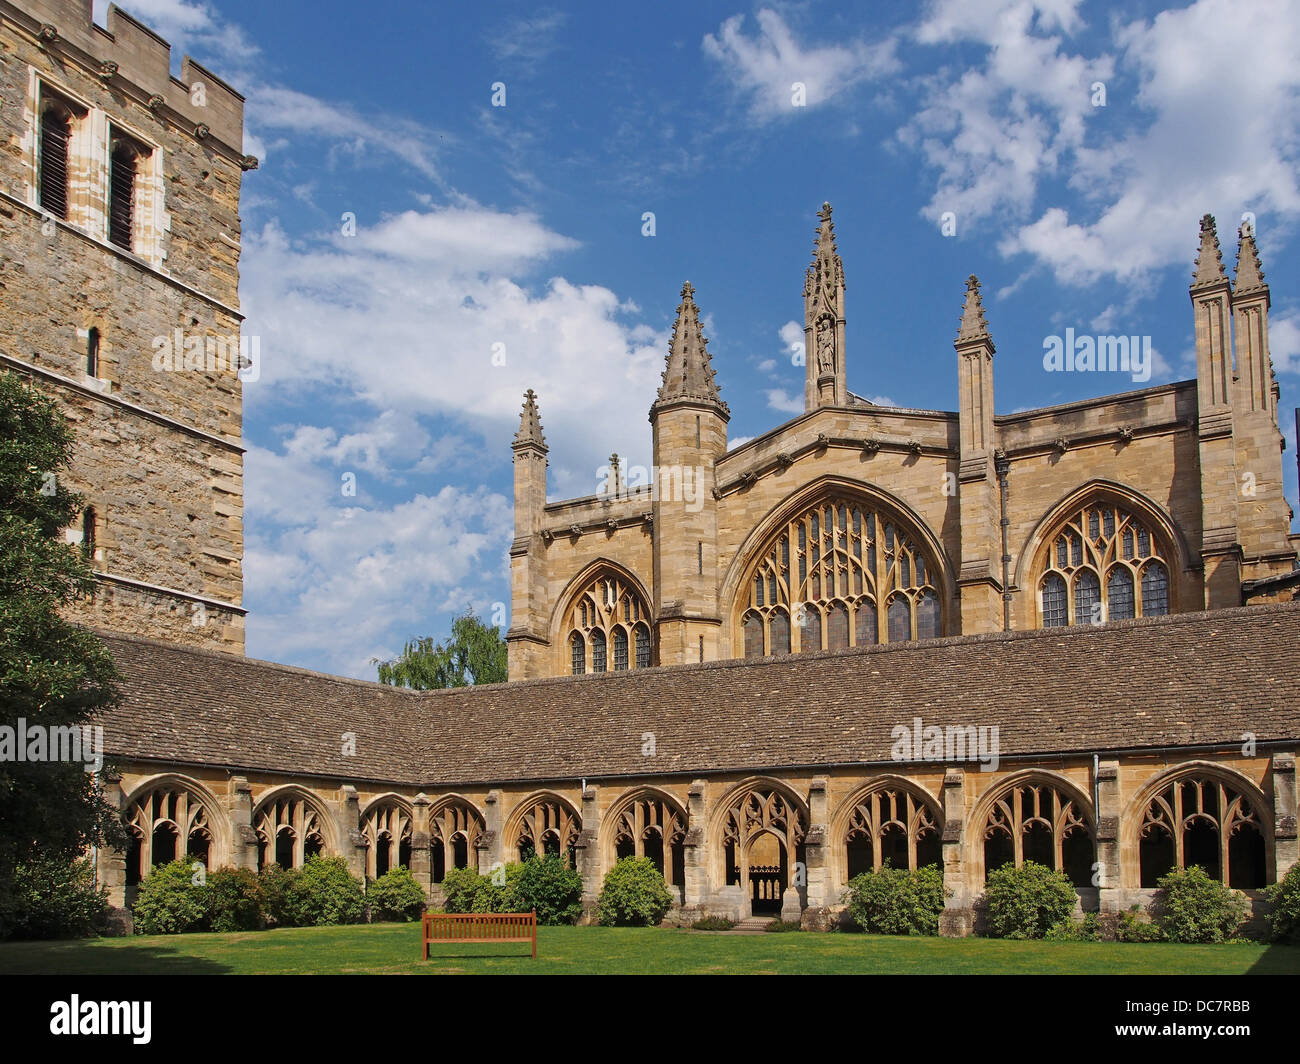 New College Cloisters, Oxford University Stock Photo